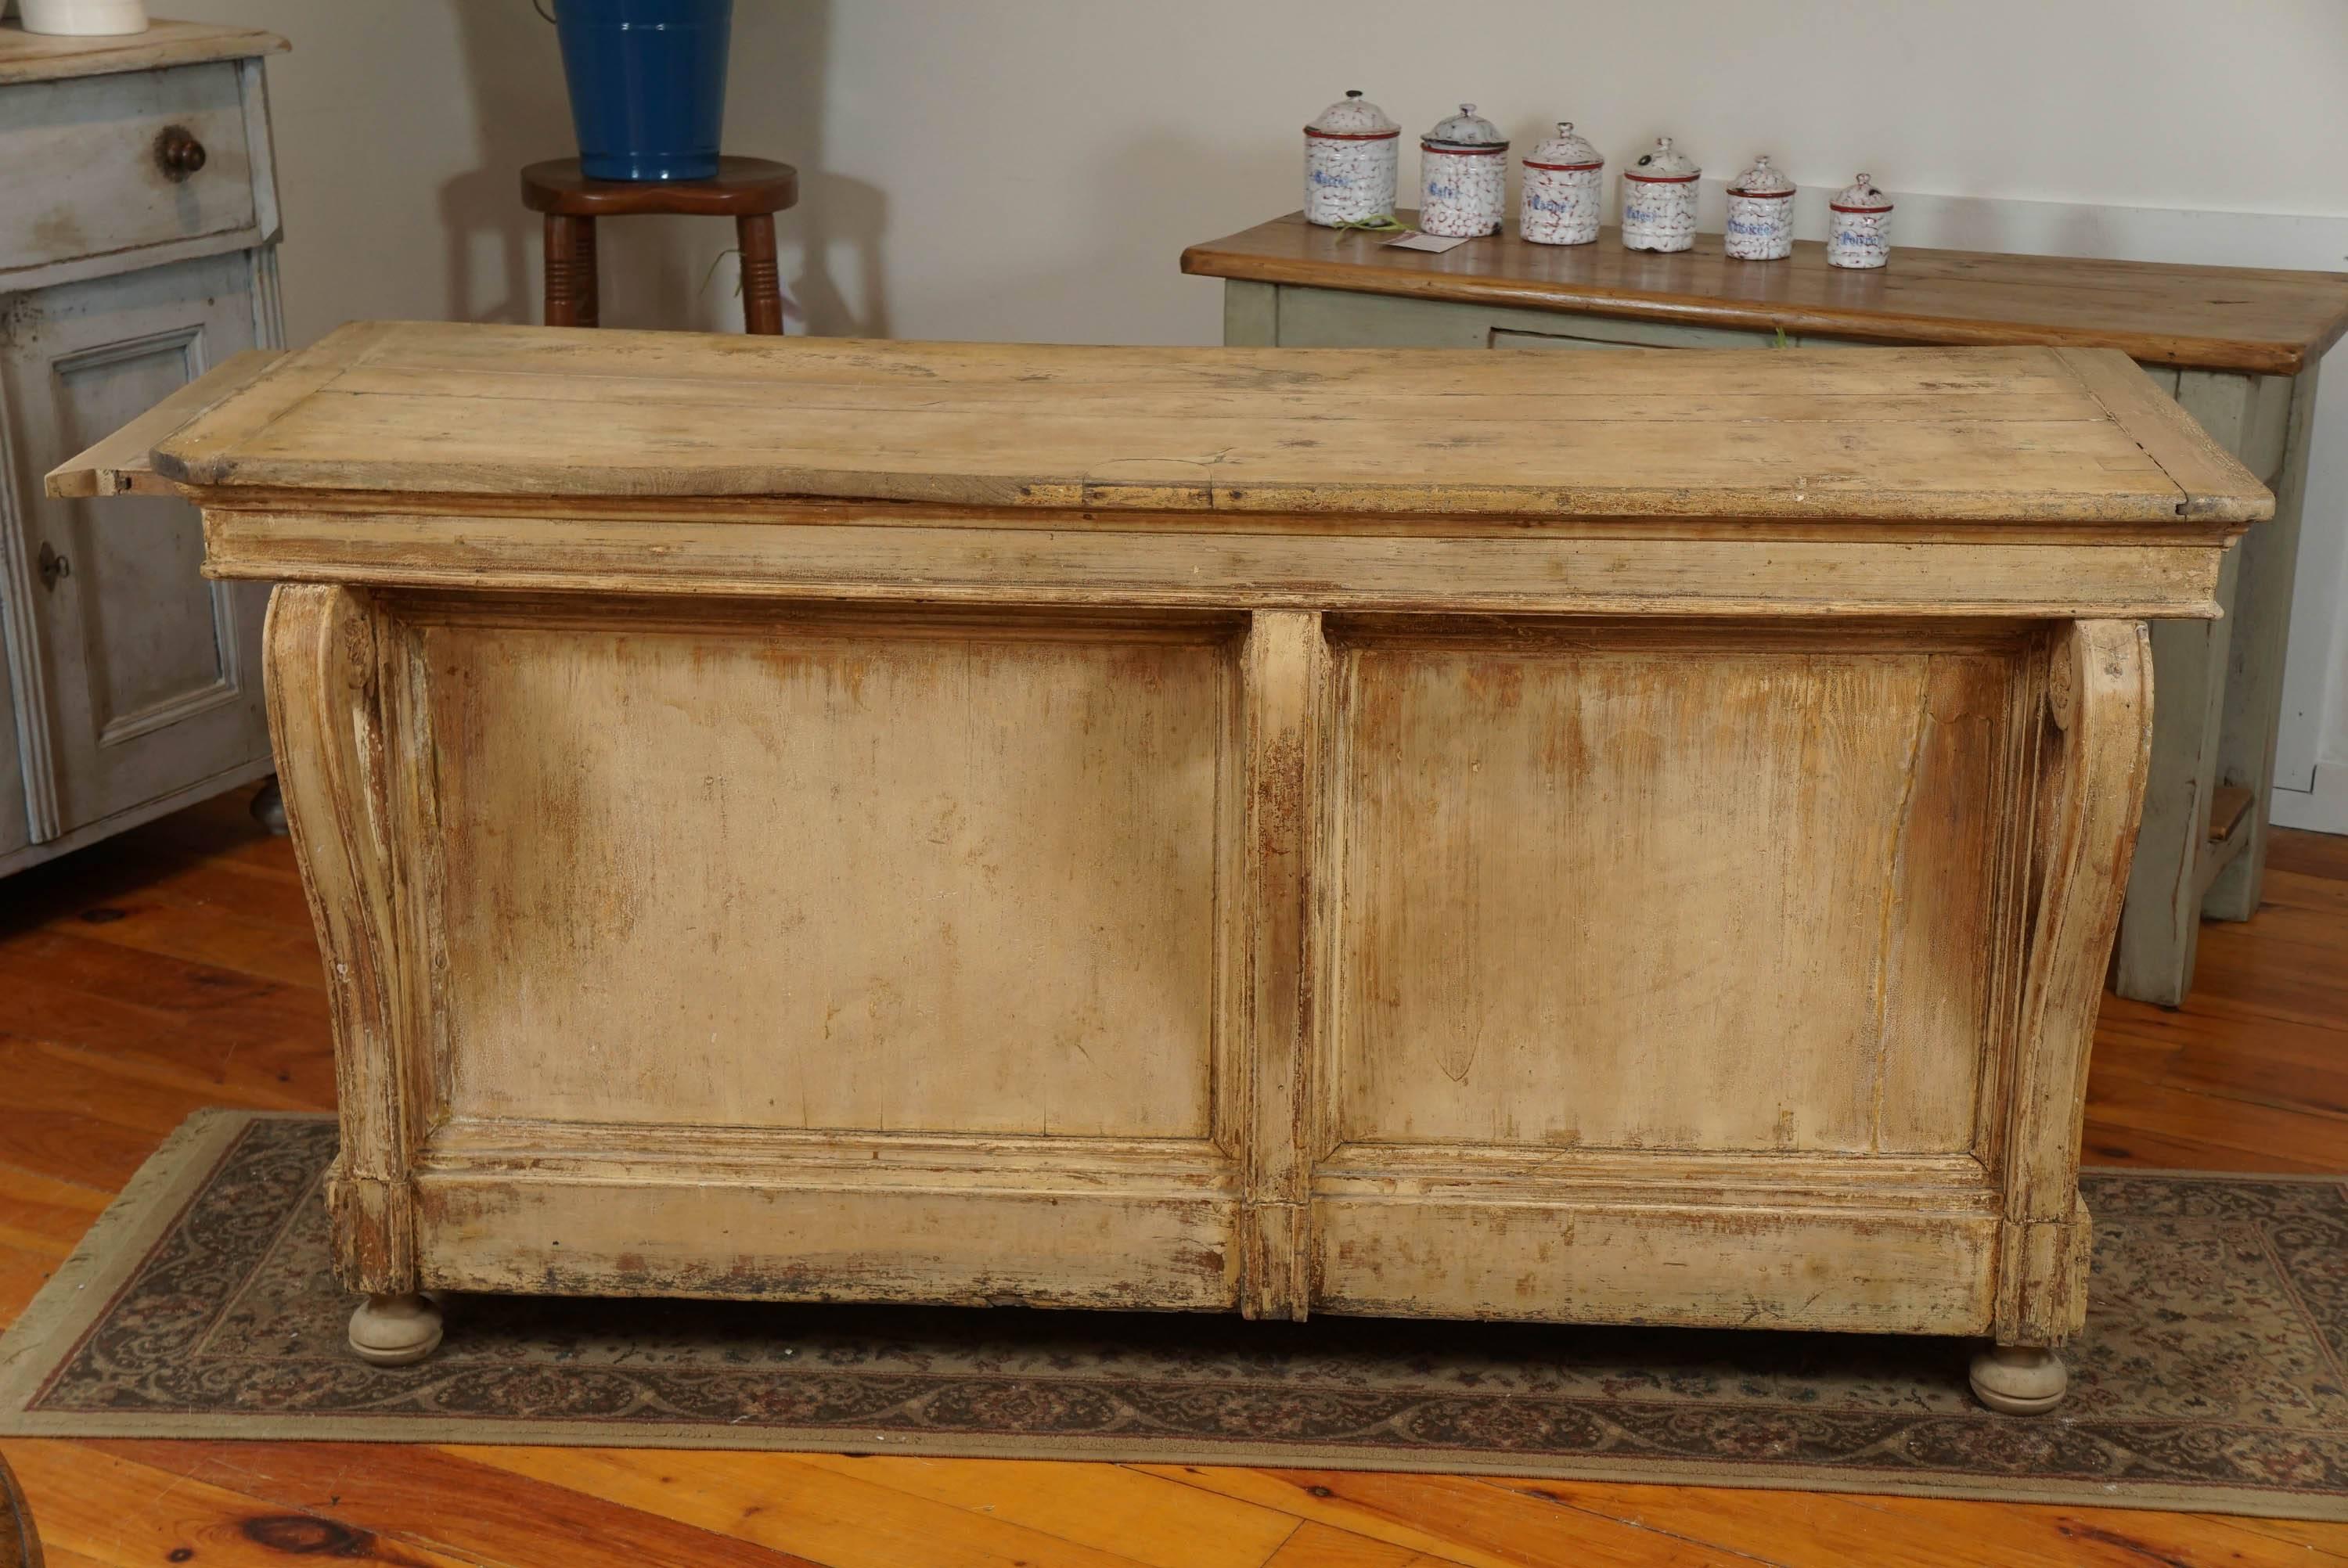 This store counter is wonderful, complete with a sliding serving board on one end. Done in original soft butter color you can’t help but to look at the korbels on one side. The other side has storage and two drawers. We can’t buy enough store